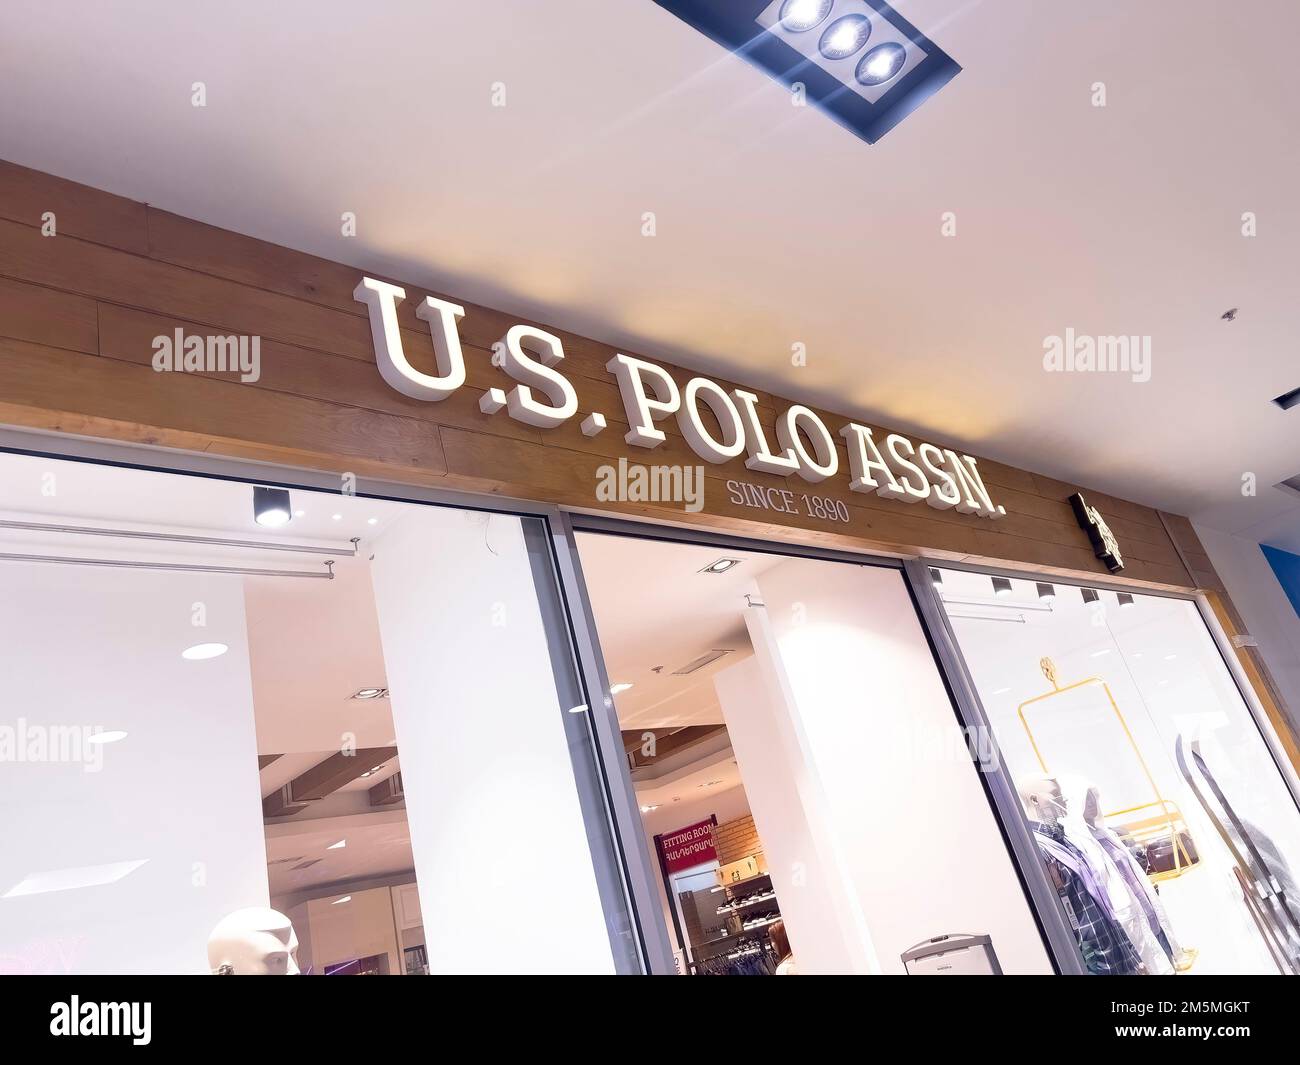 U s polo assn brand hi-res stock photography and images - Alamy